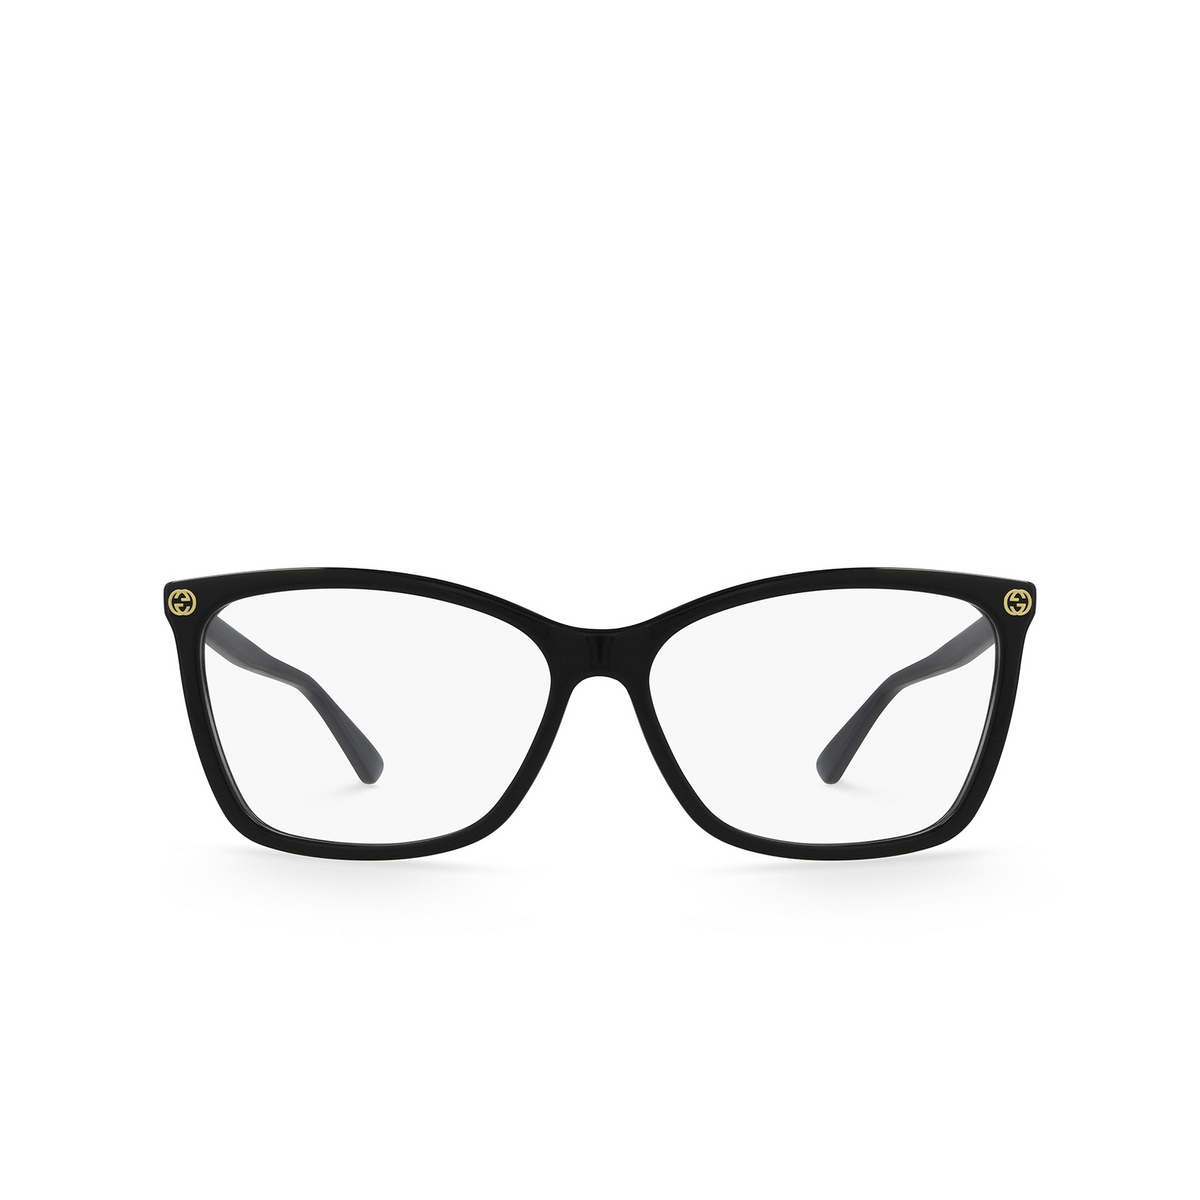 Gucci® Cat-eye Eyeglasses: GG0025O color Black 001 - front view.